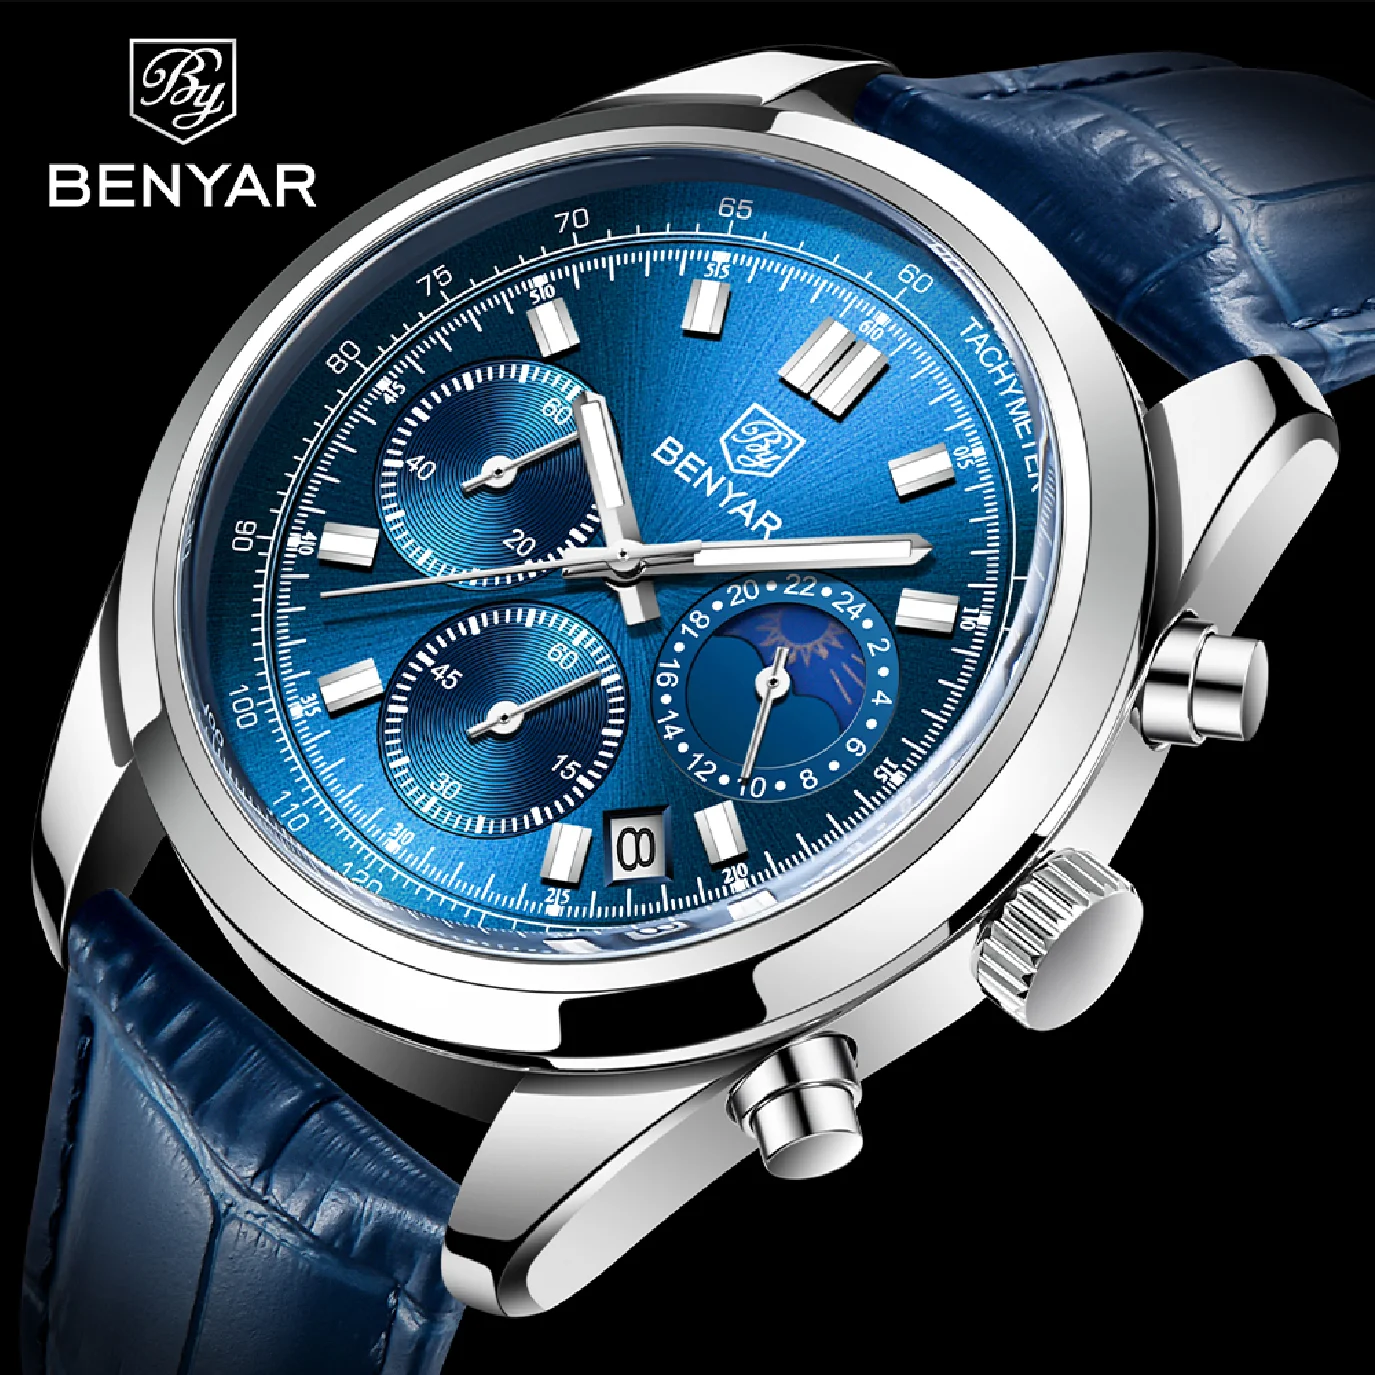 

BENYAR Sports Chronograph 2021 New Men Quartz Wristwatch Stainless steel Diver Watch 30ATM Waterproof Leather Military Watches